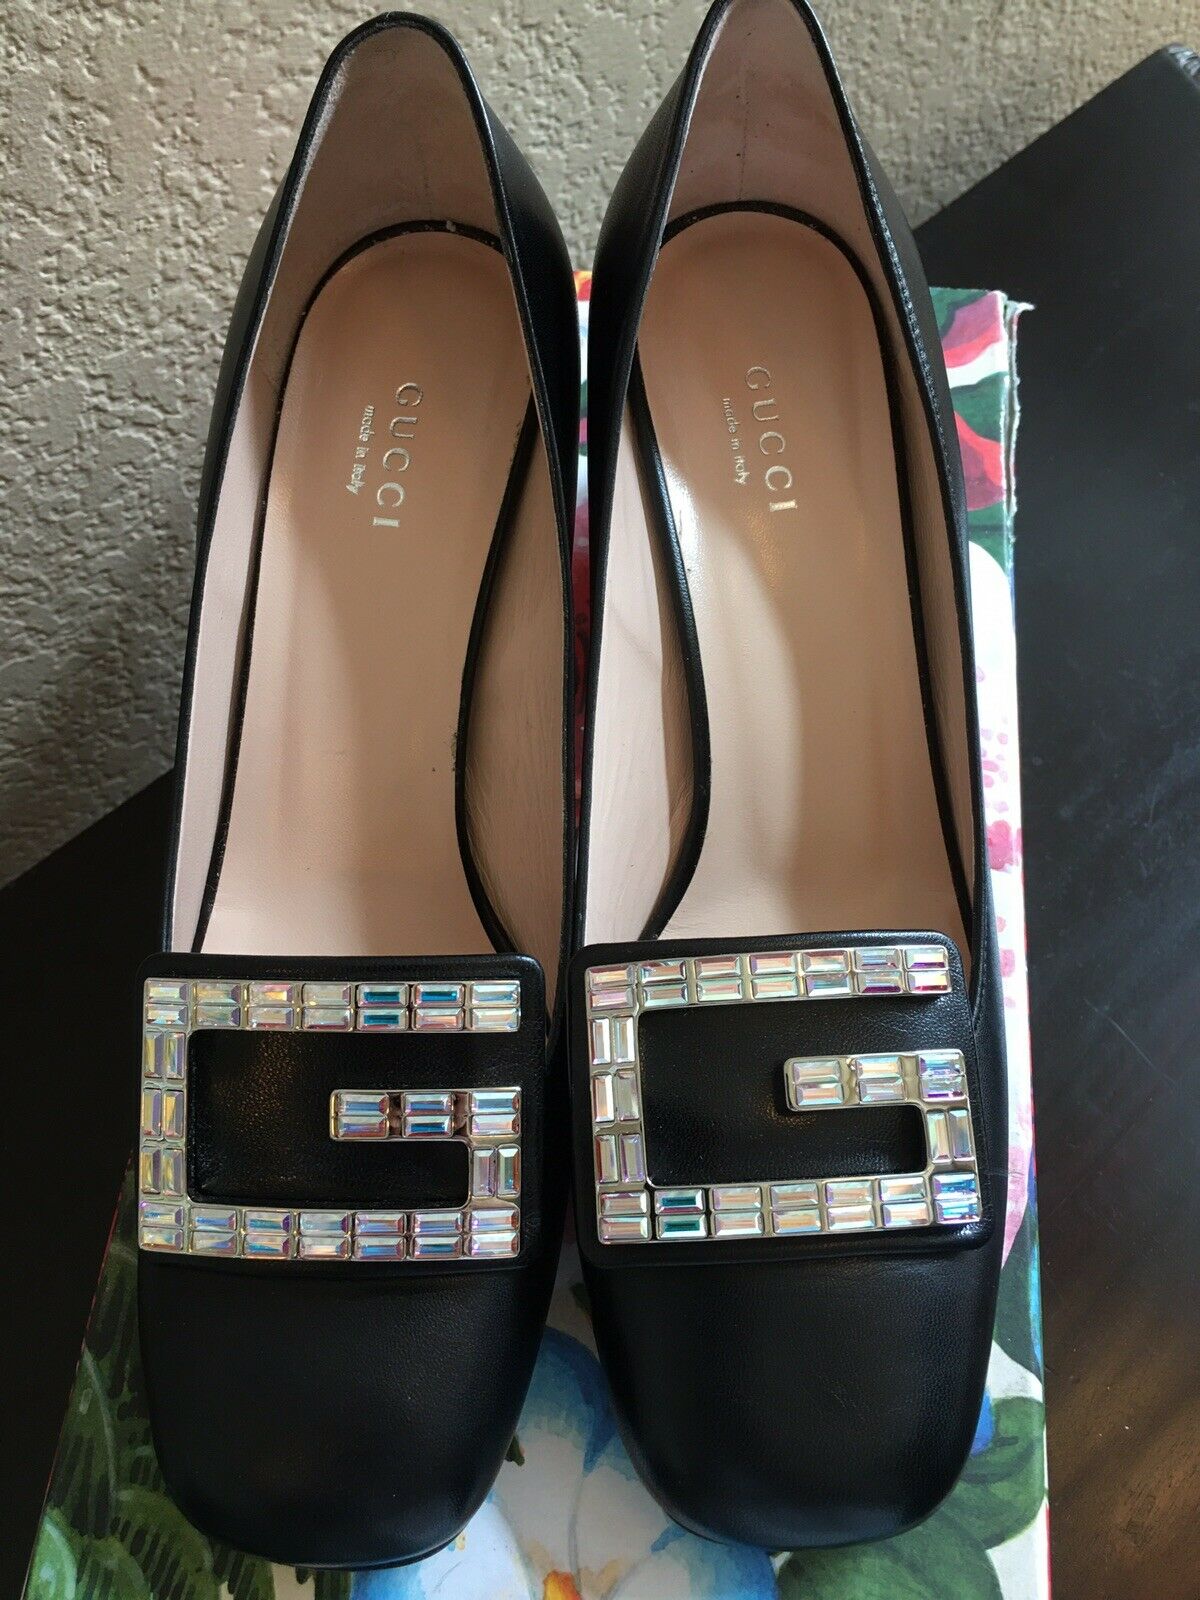 Gucci Dressy ￼shoes with crystals￼